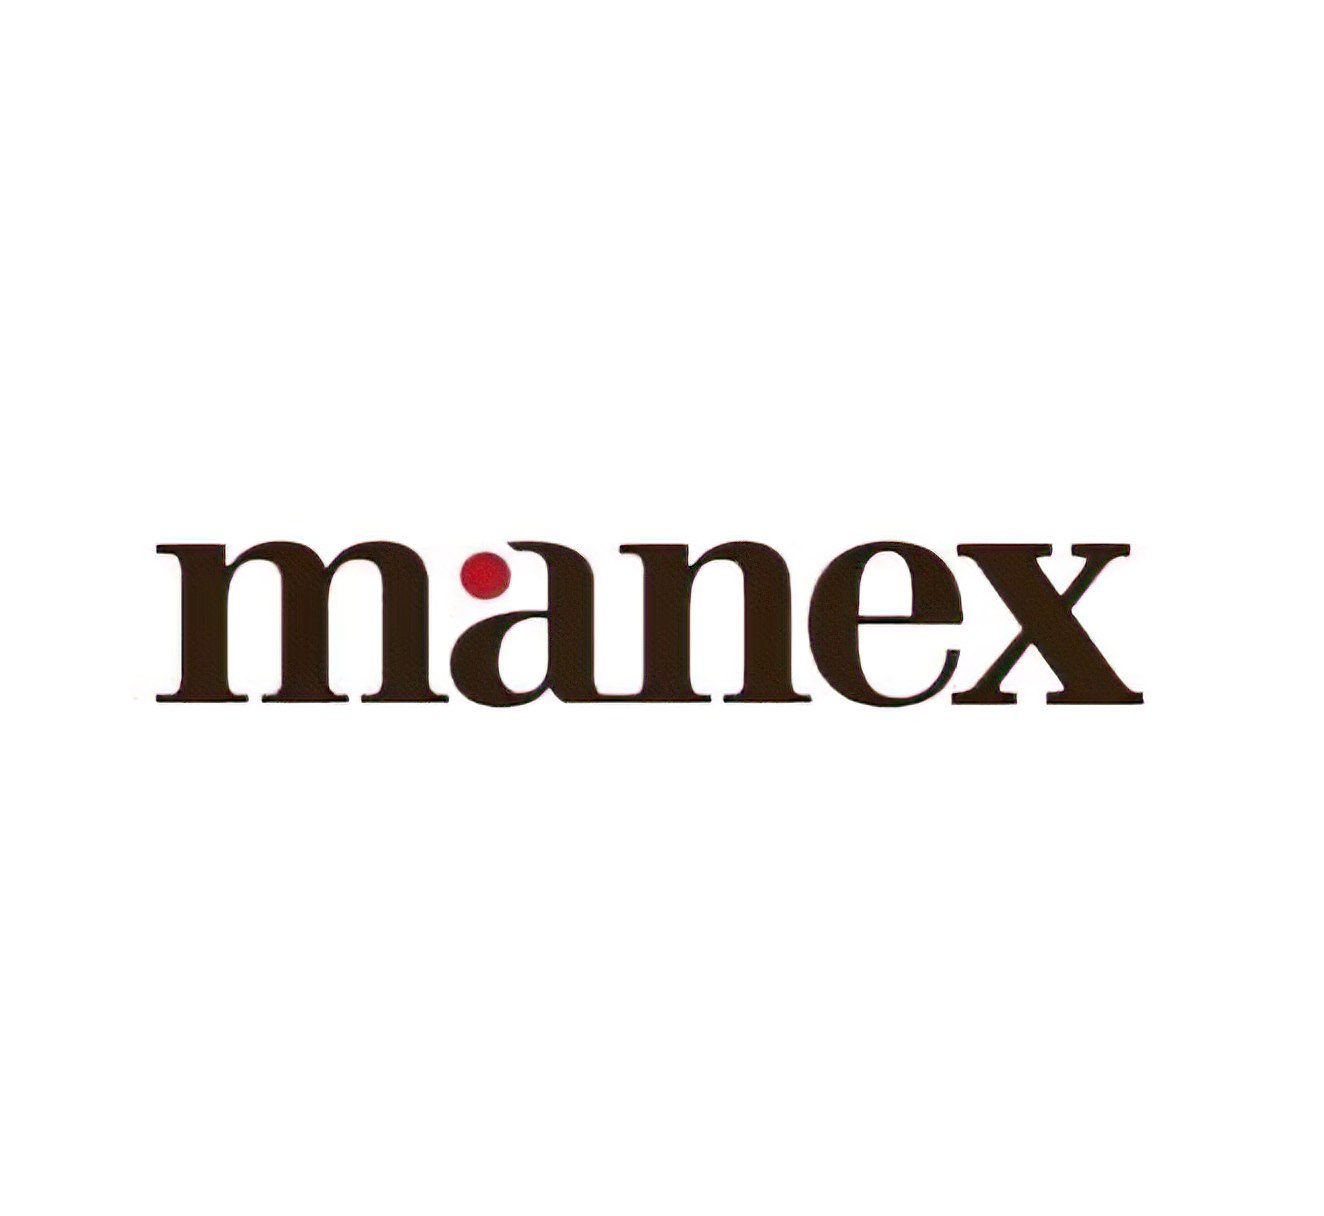 Business logo of Manex Consulting